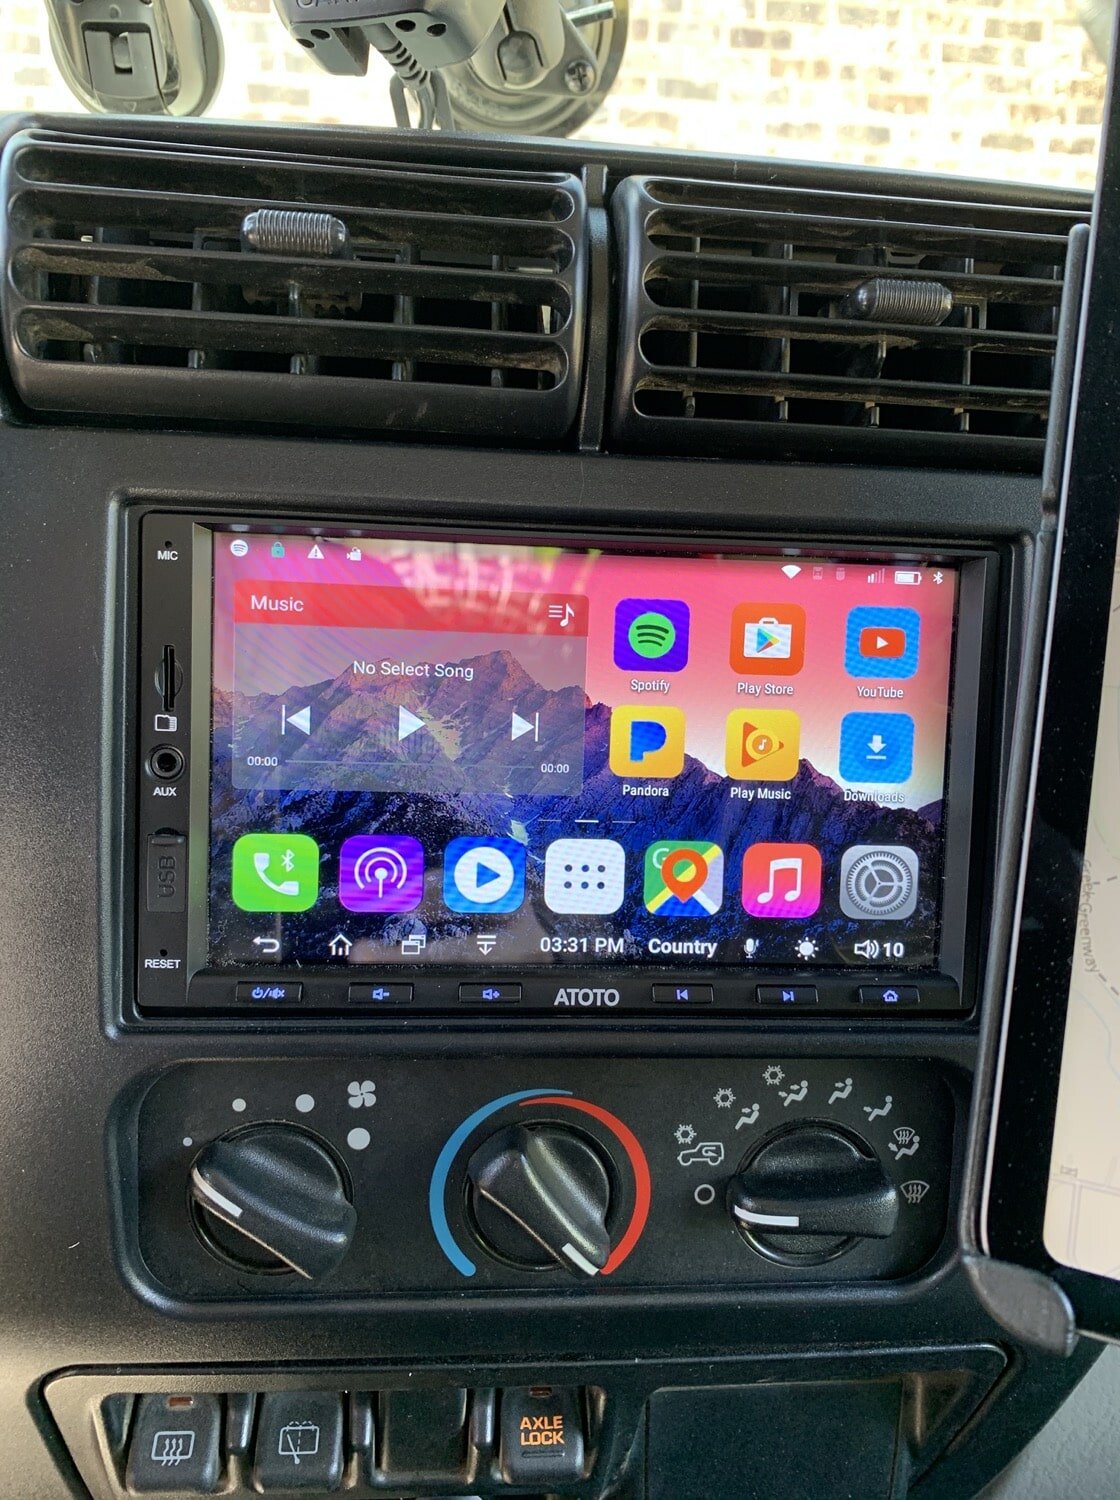 ATOTO A6 Double-DIN Navigation Stereo Install in a Jeep Wrangler TJ -  Southeast 4x4 Trails